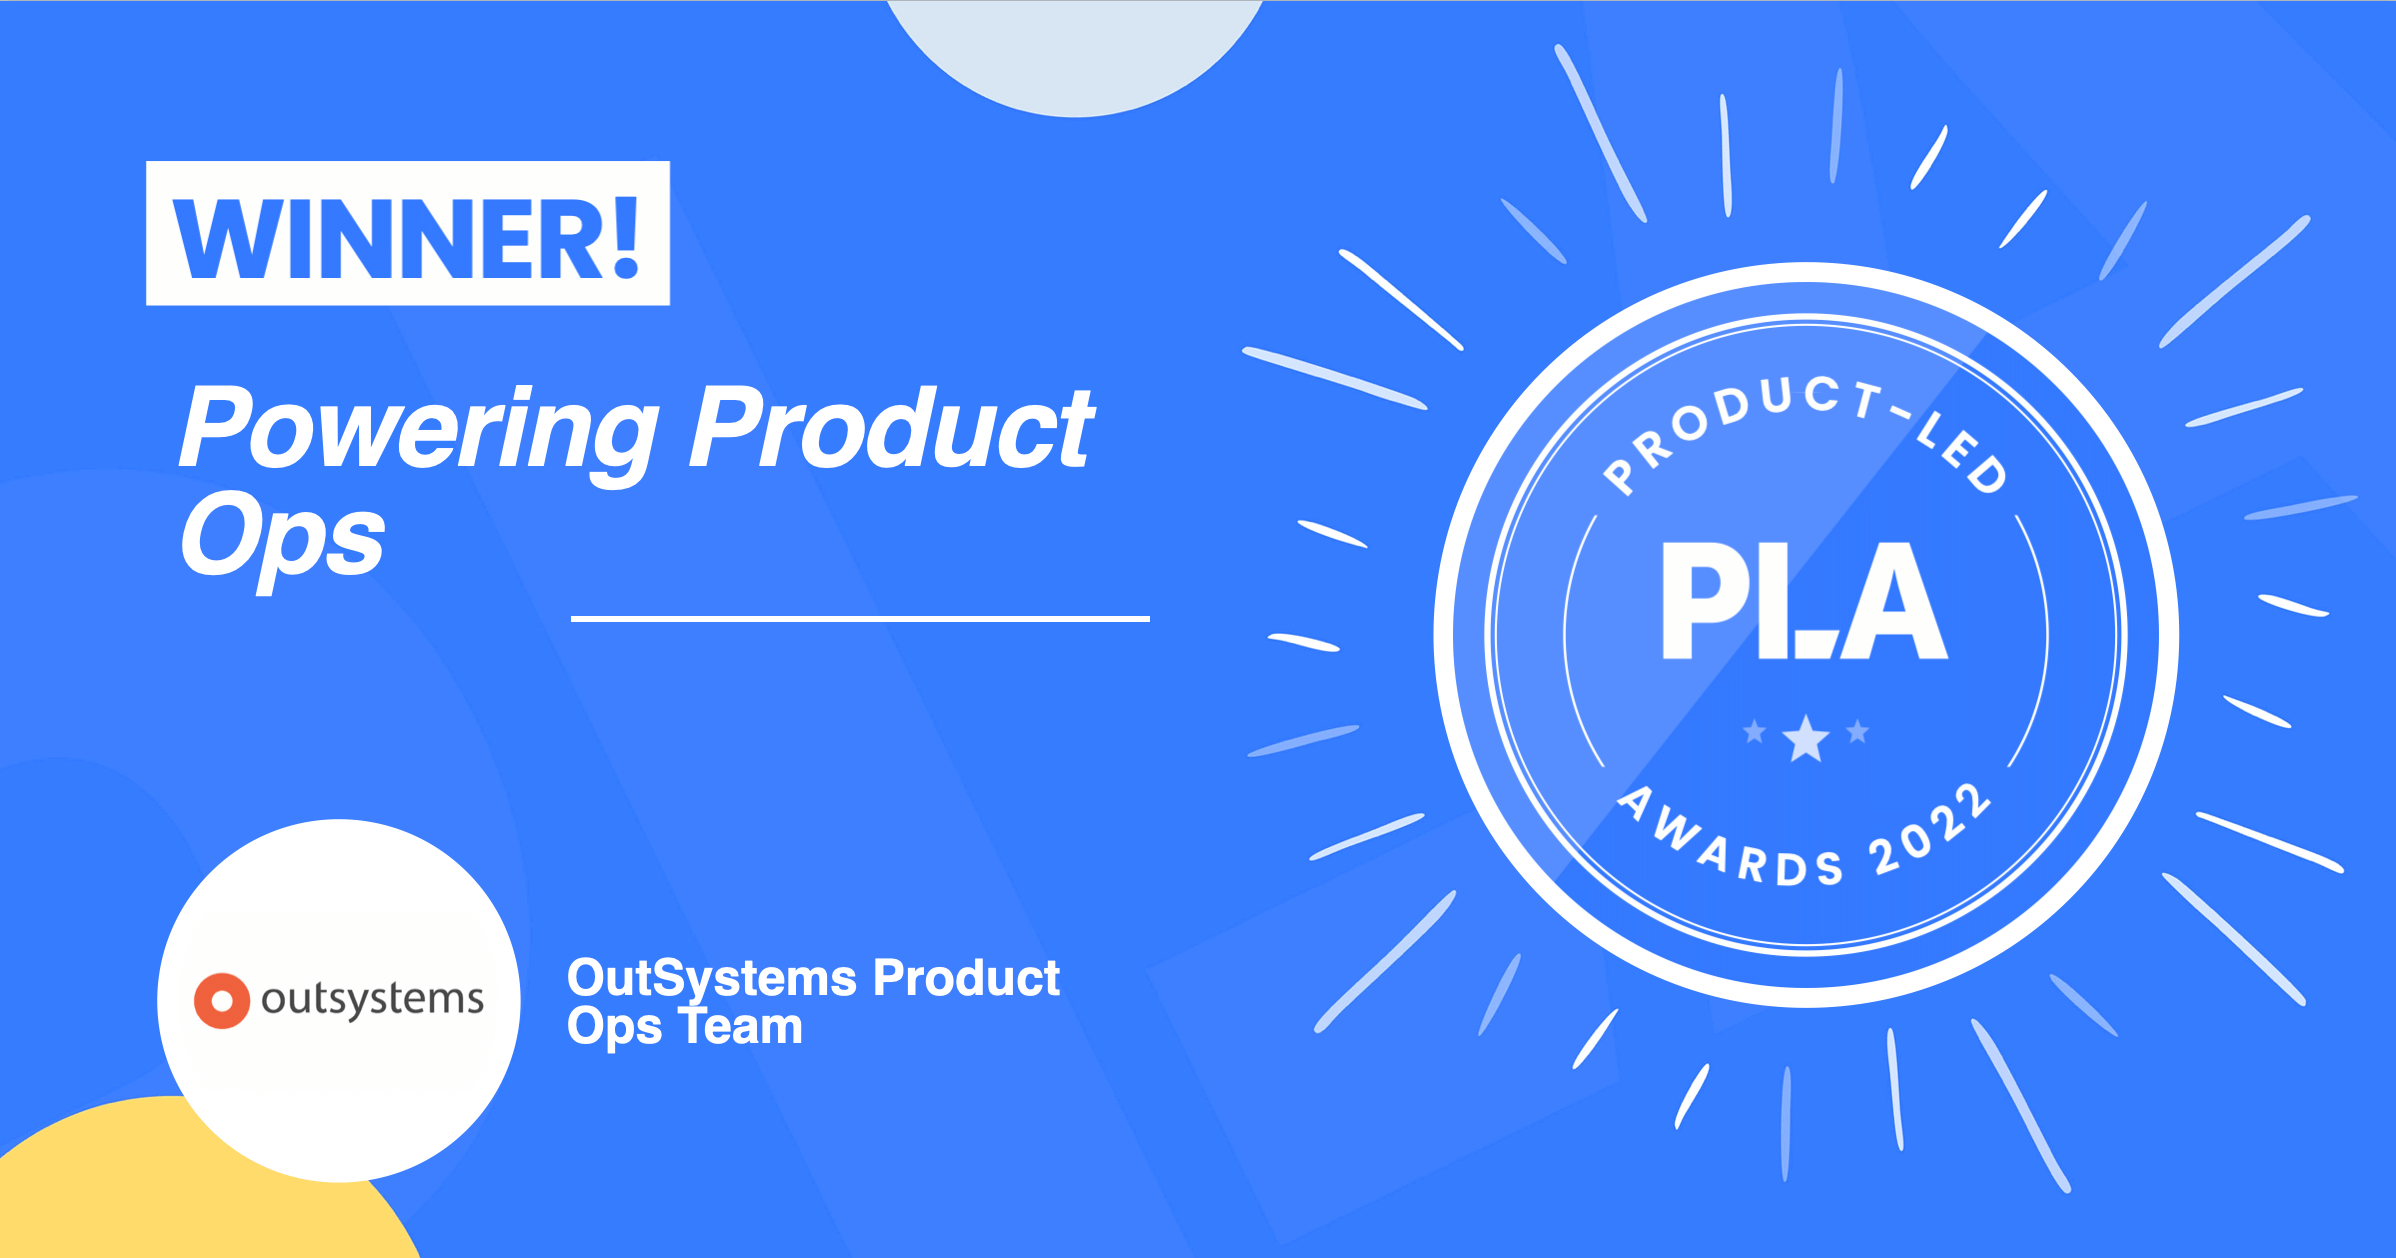 Powering Product Ops Award Winner: OutSystems Product Ops Team